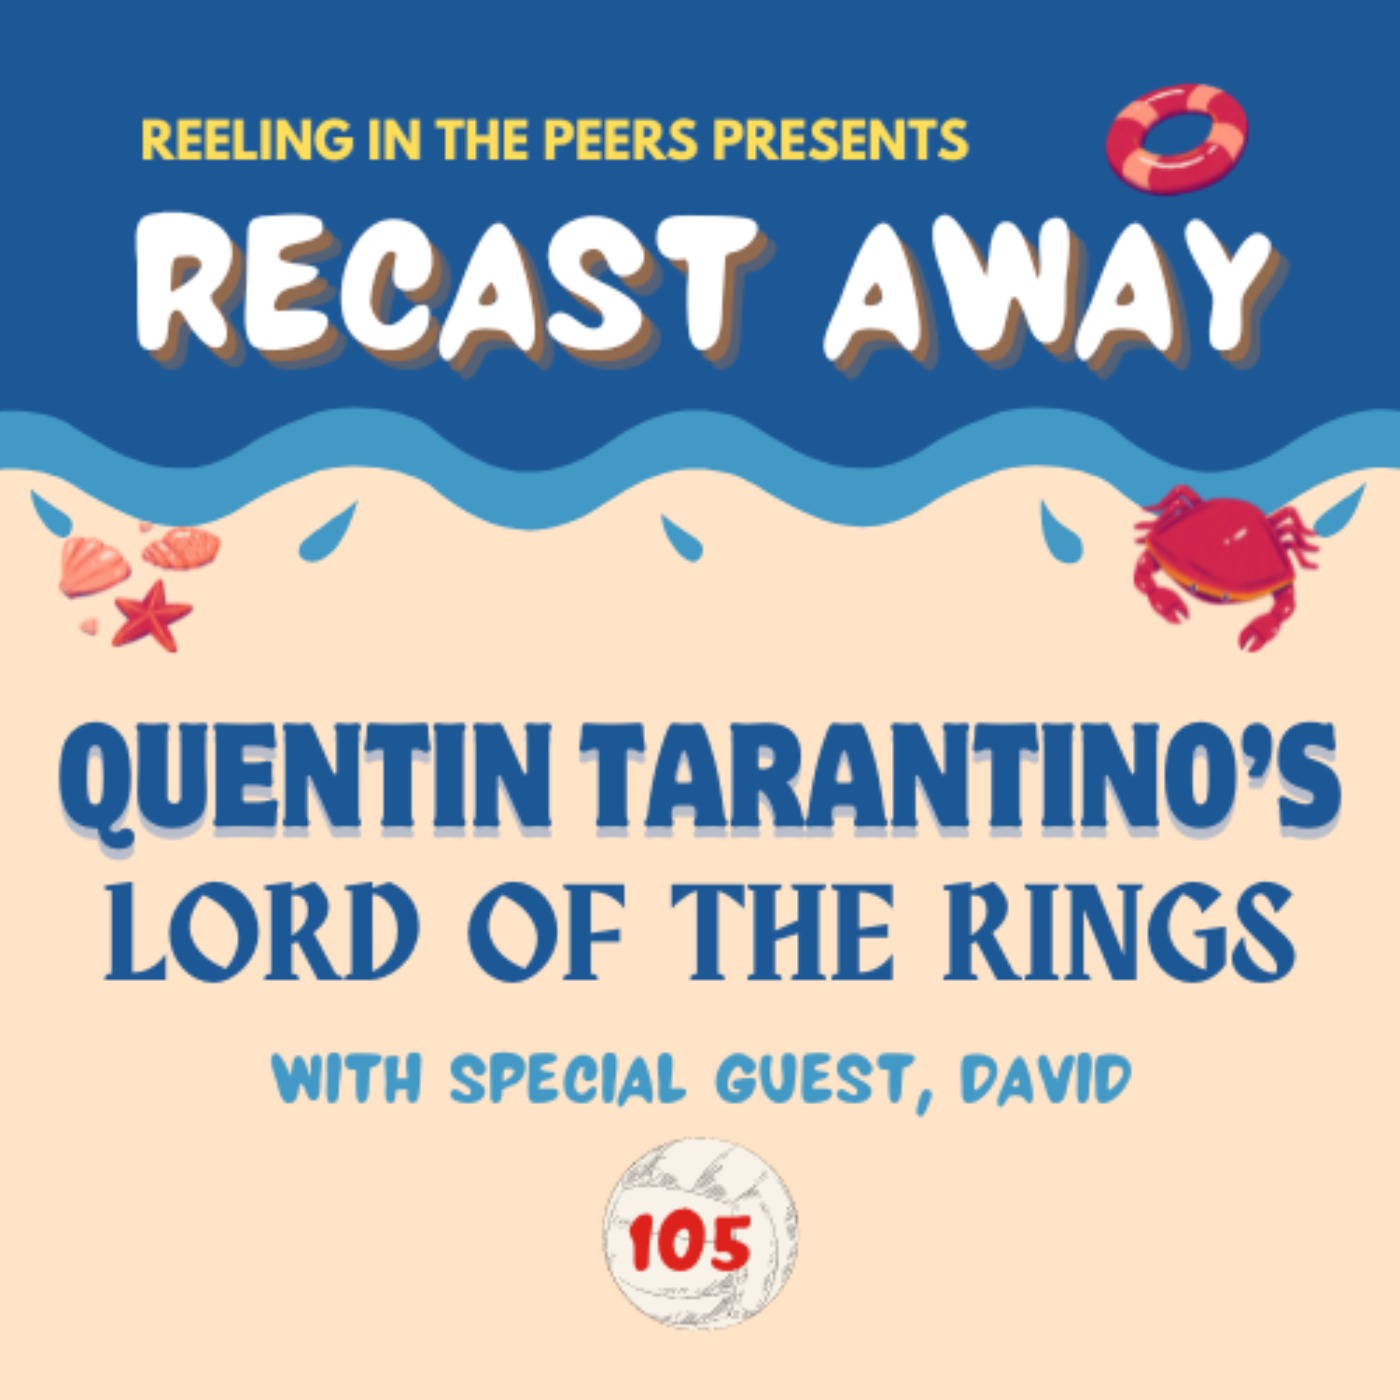 105 Quentin Tarantino's Lord of the Rings - Recast Away